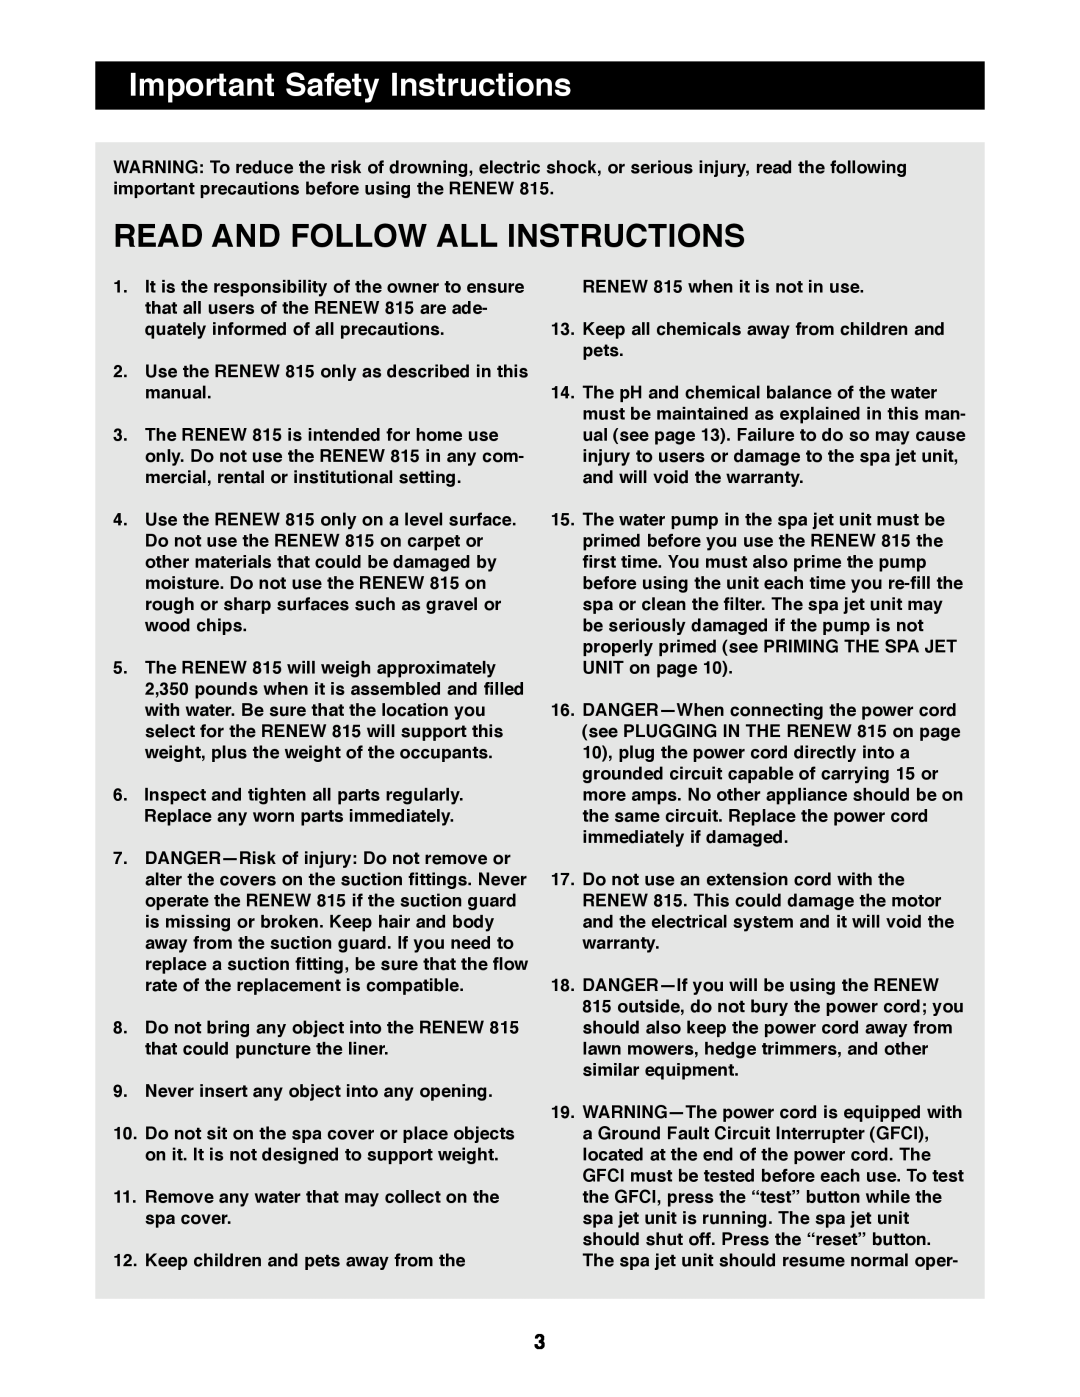 Image IMHS81590 manual Important Safety Instructions, Read And Follow All Instructions 